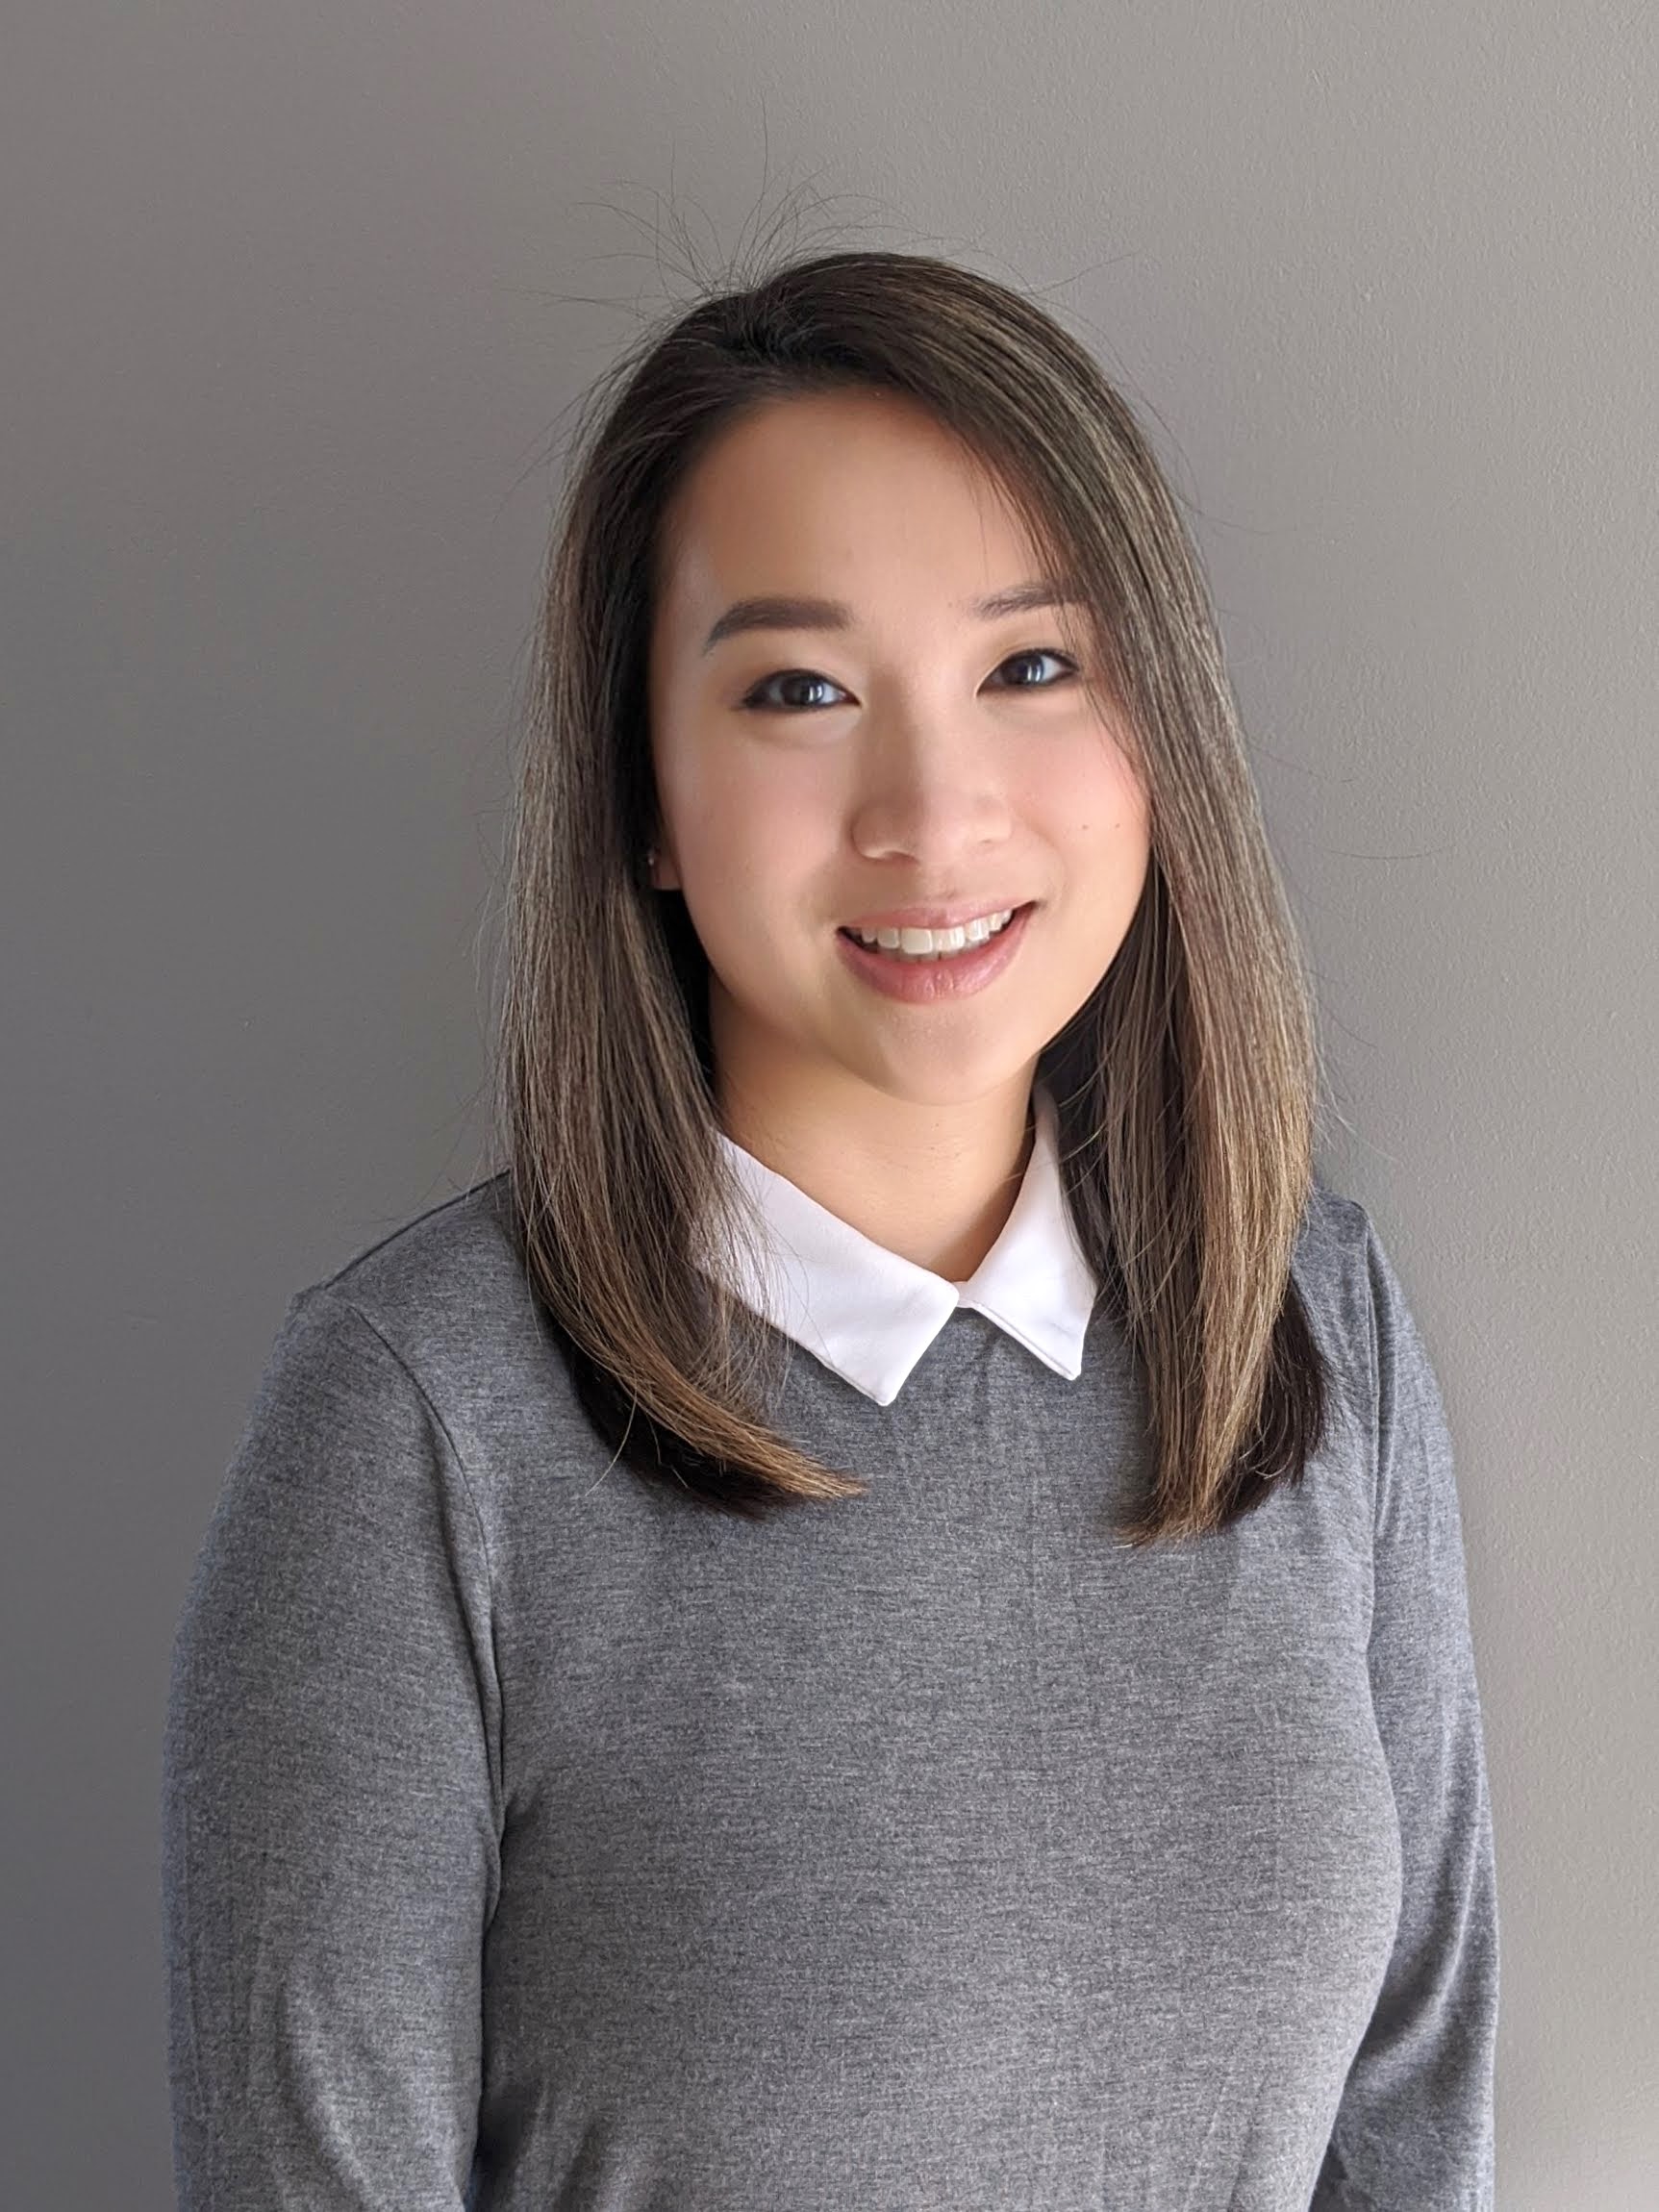 Photo of Dr. Jenny Phan, smiling woman with dark hair wearing gray and white collar against a dark gray background